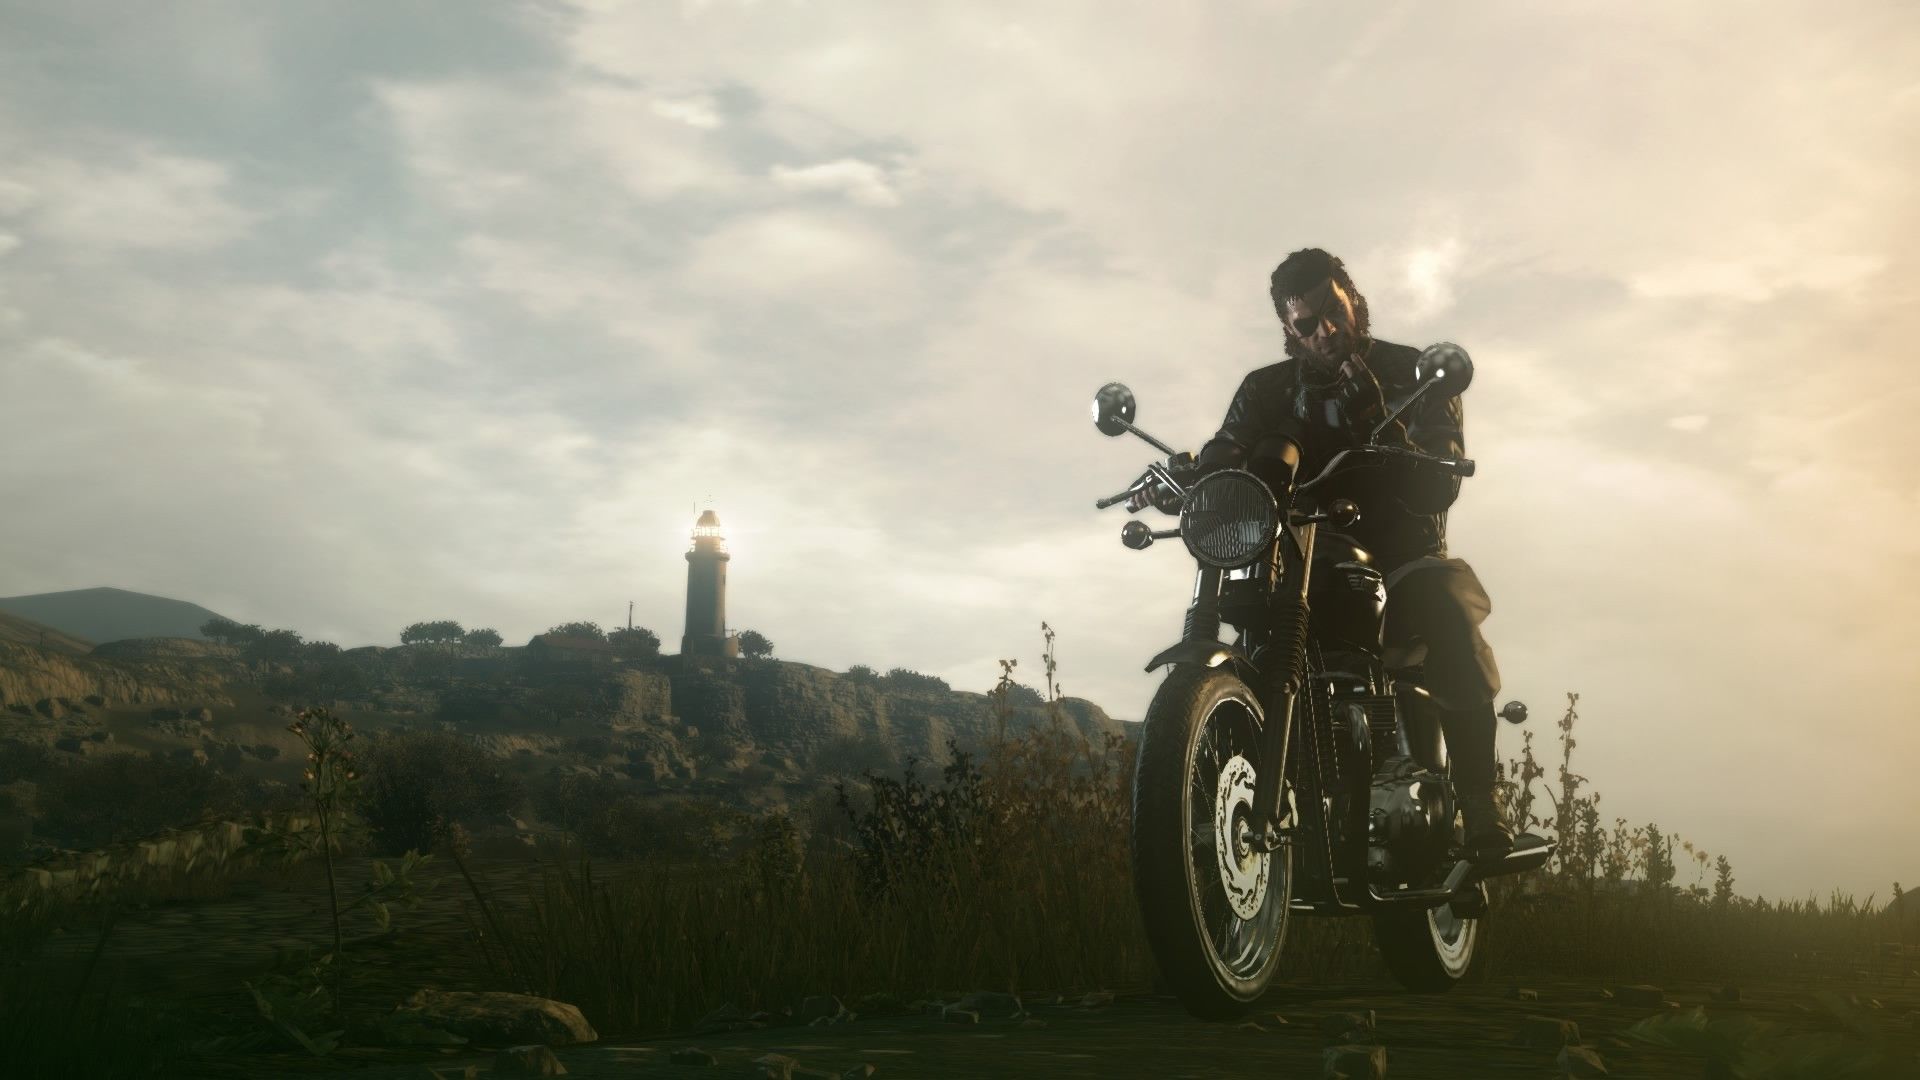 Wallpaper, hill, bicycle, motorcycle, vehicle, evening, morning, Metal Gear Solid, Metal Gear Solid V The Phantom Pain, Big Boss, screenshot, atmospheric phenomenon, atmosphere of earth, mountain bike, extreme sport 1920x1080